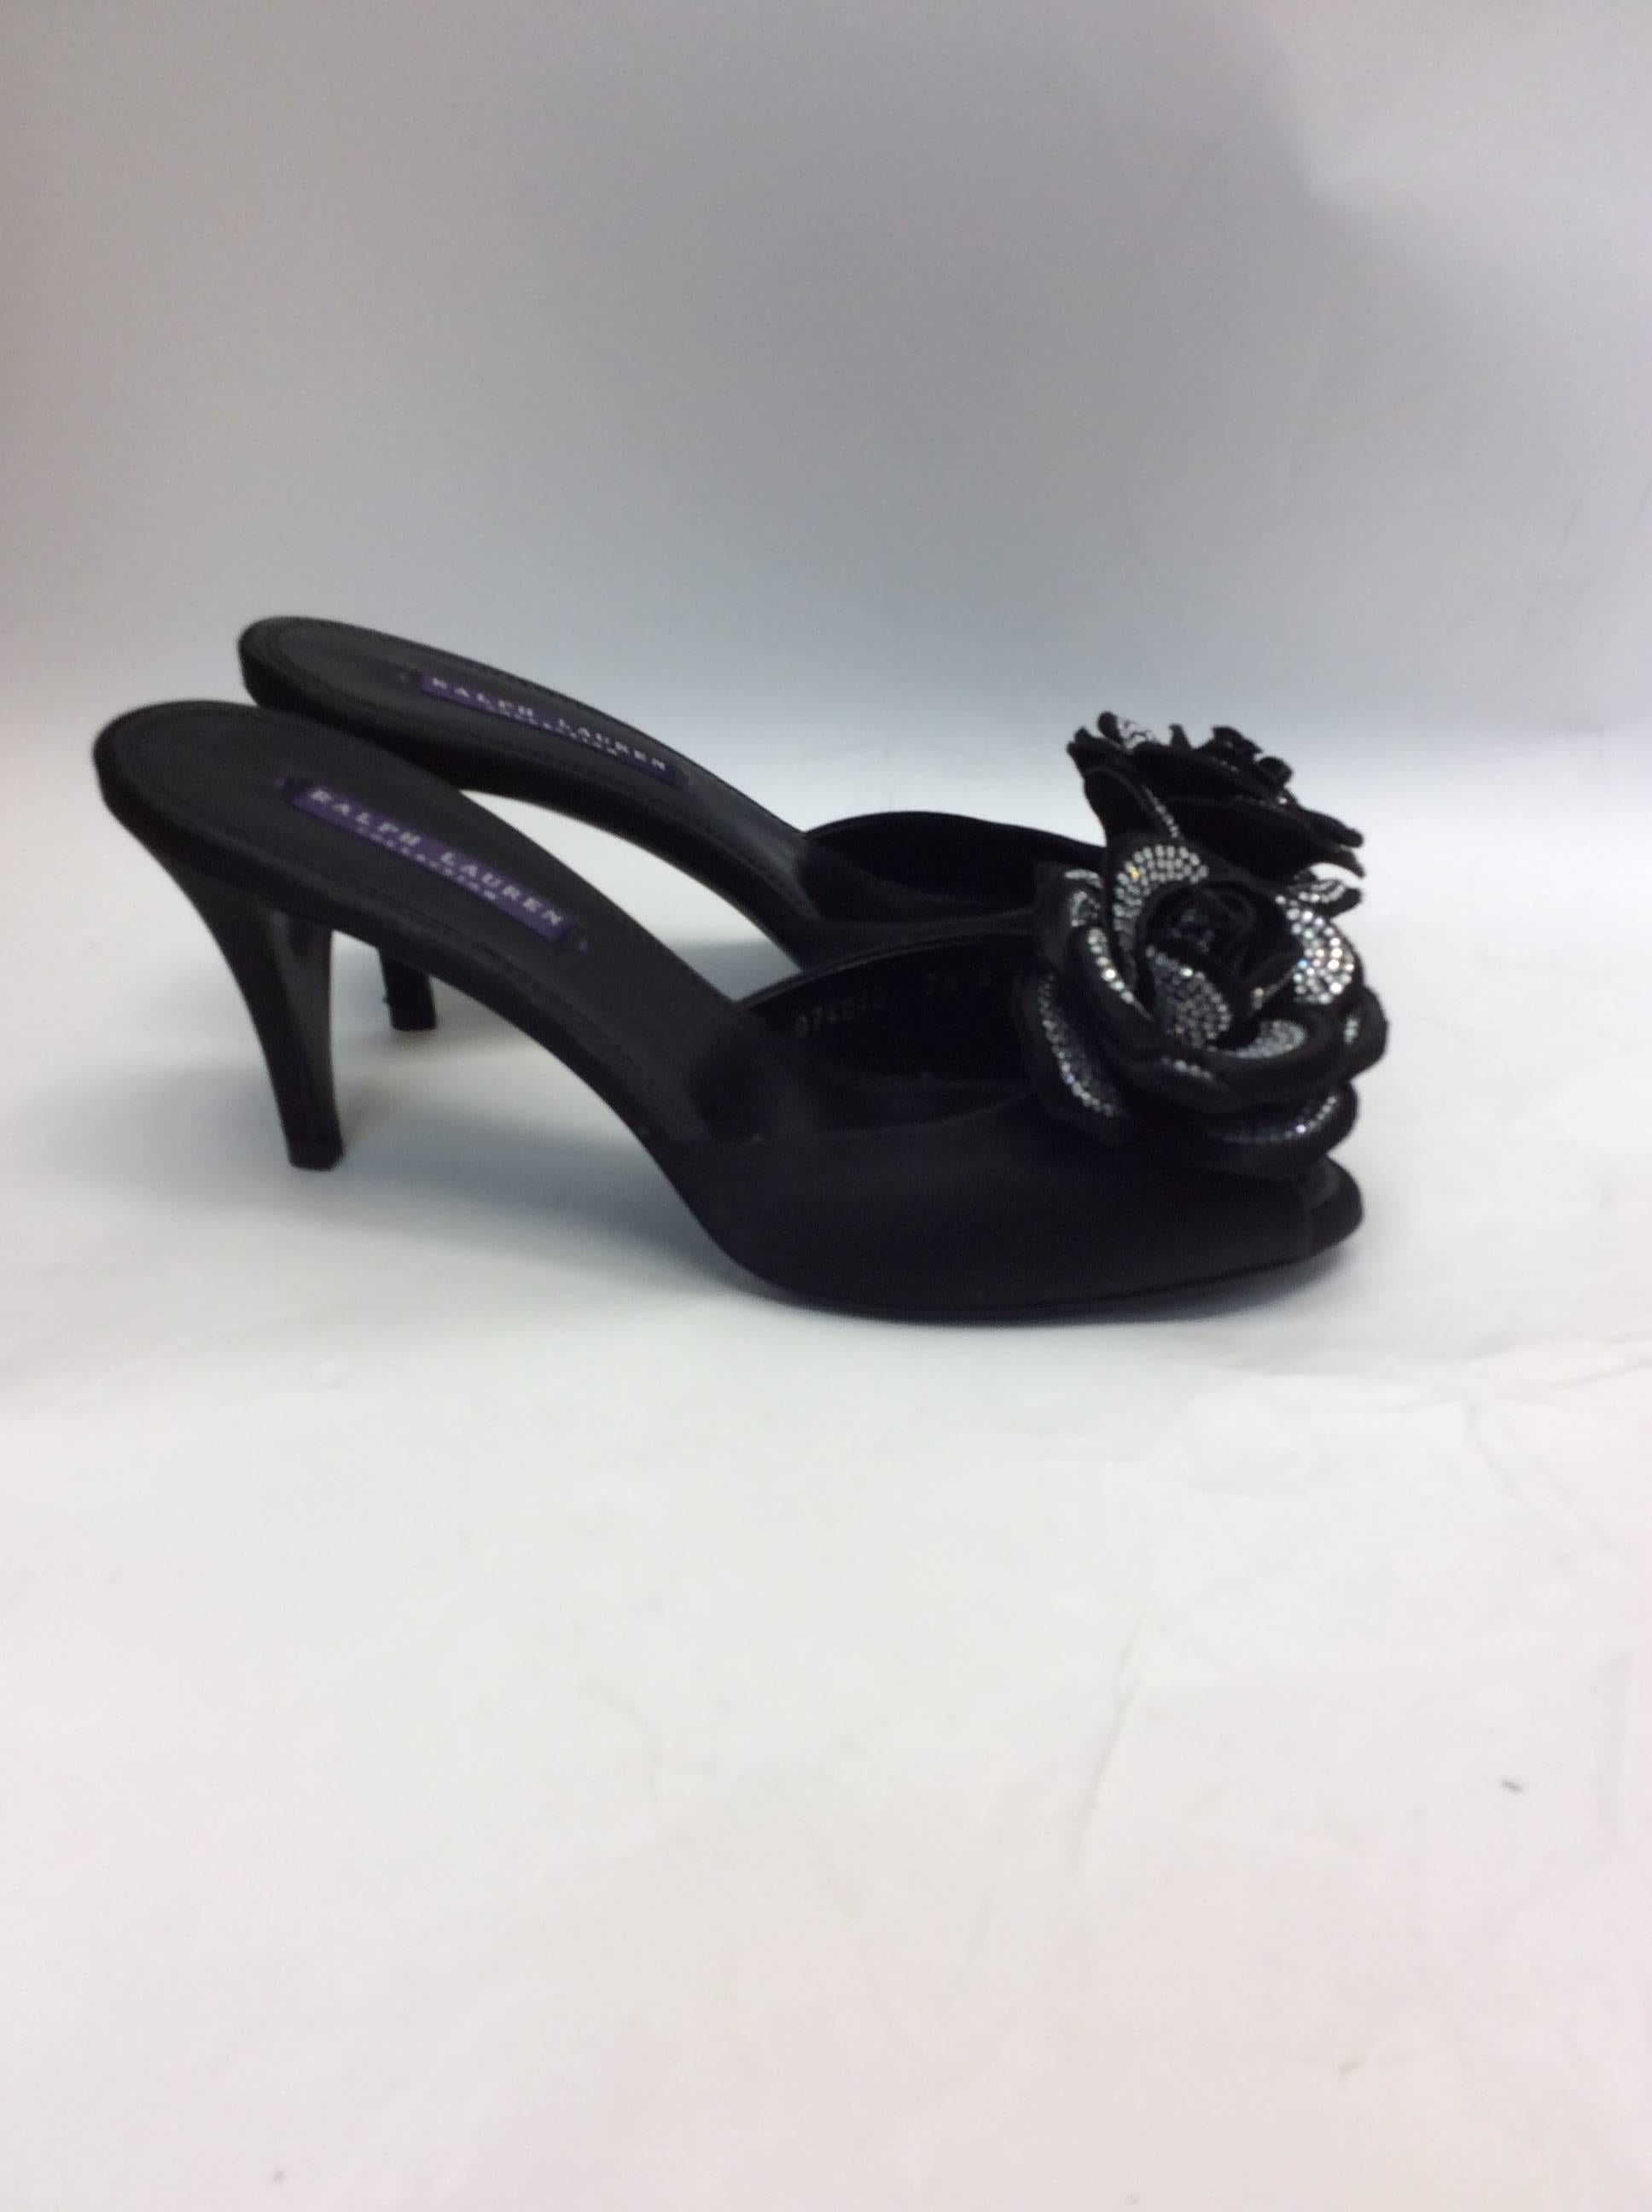 Ralph Lauren Floral Embellished Satin Pump In Excellent Condition For Sale In Narberth, PA